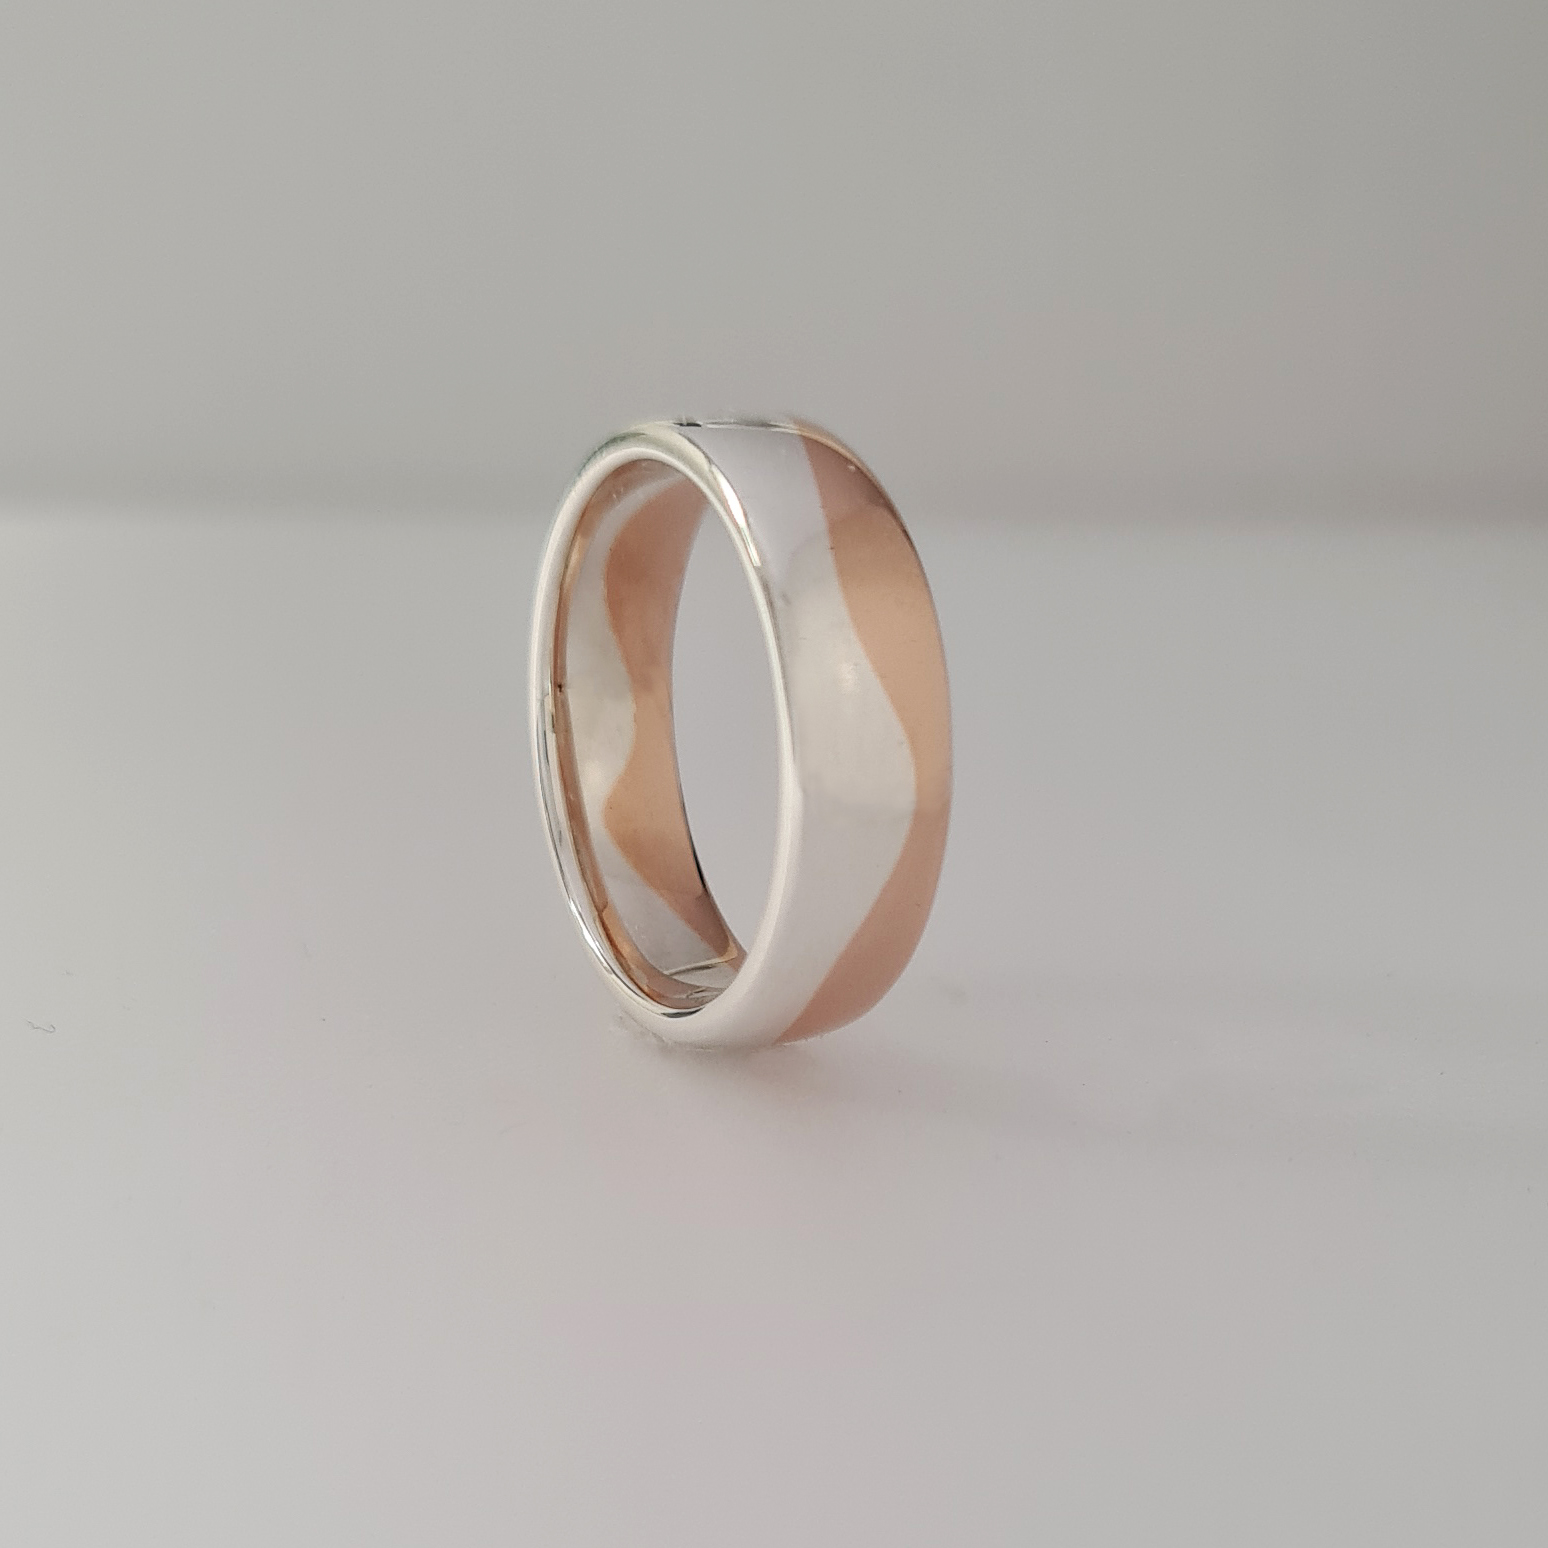 A wedding band with a wave design of contrasting rose and white gold on a white background